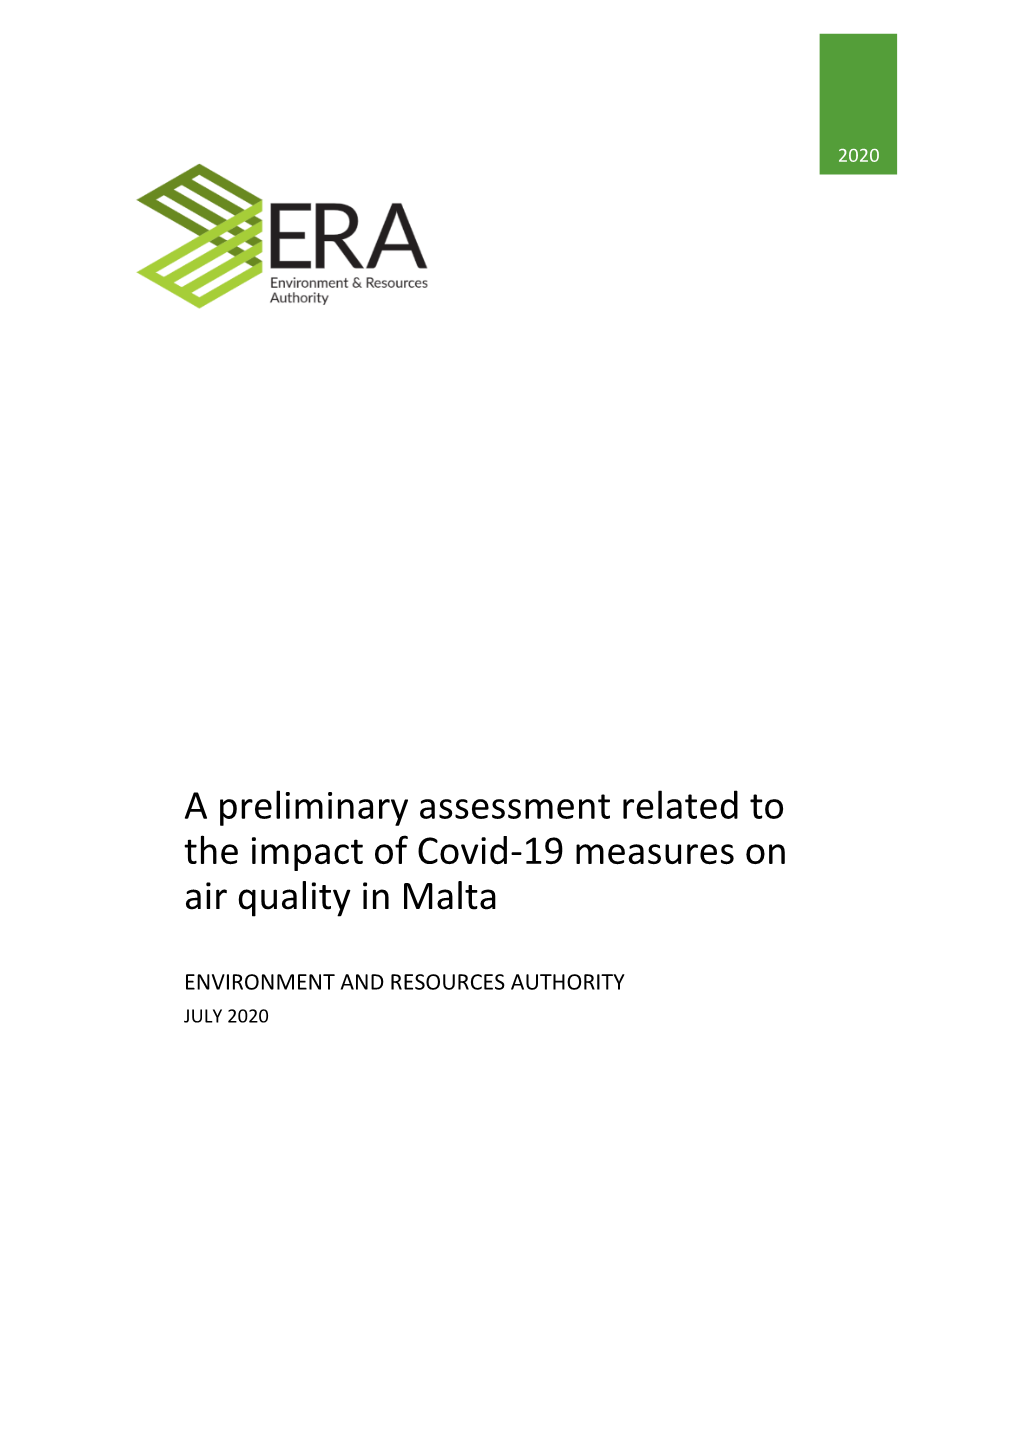 A Preliminary Assessment Related to the Impact of Covid-19 Measures on Air Quality in Malta